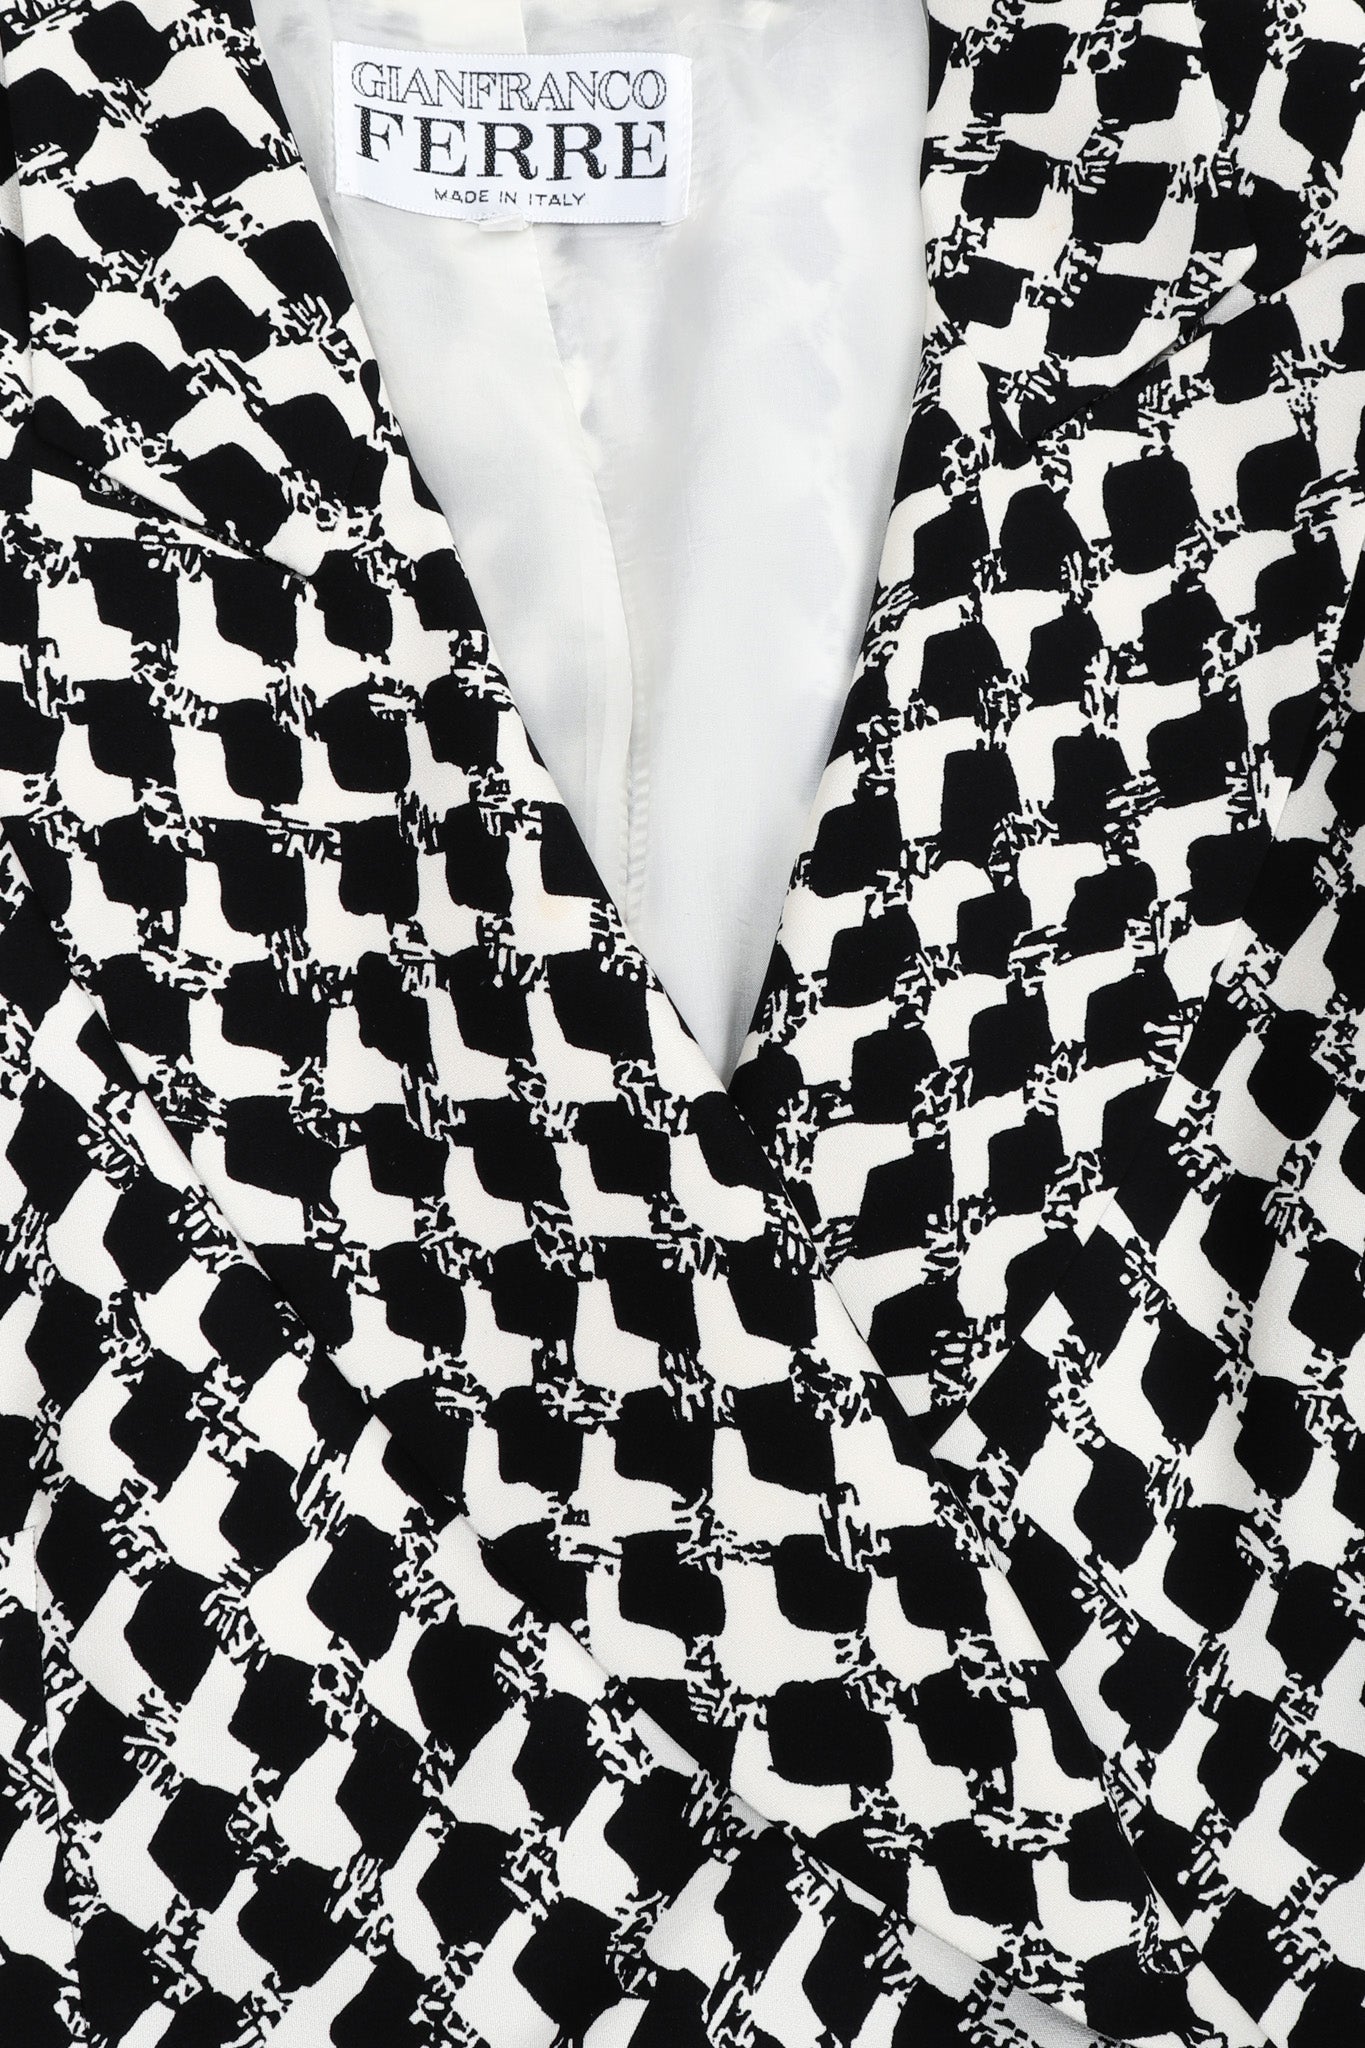 Recess Los Angeles Vintage Gianfranco Ferre Graphic Black And White Double Breasted Jacket Double Pleat Pants 